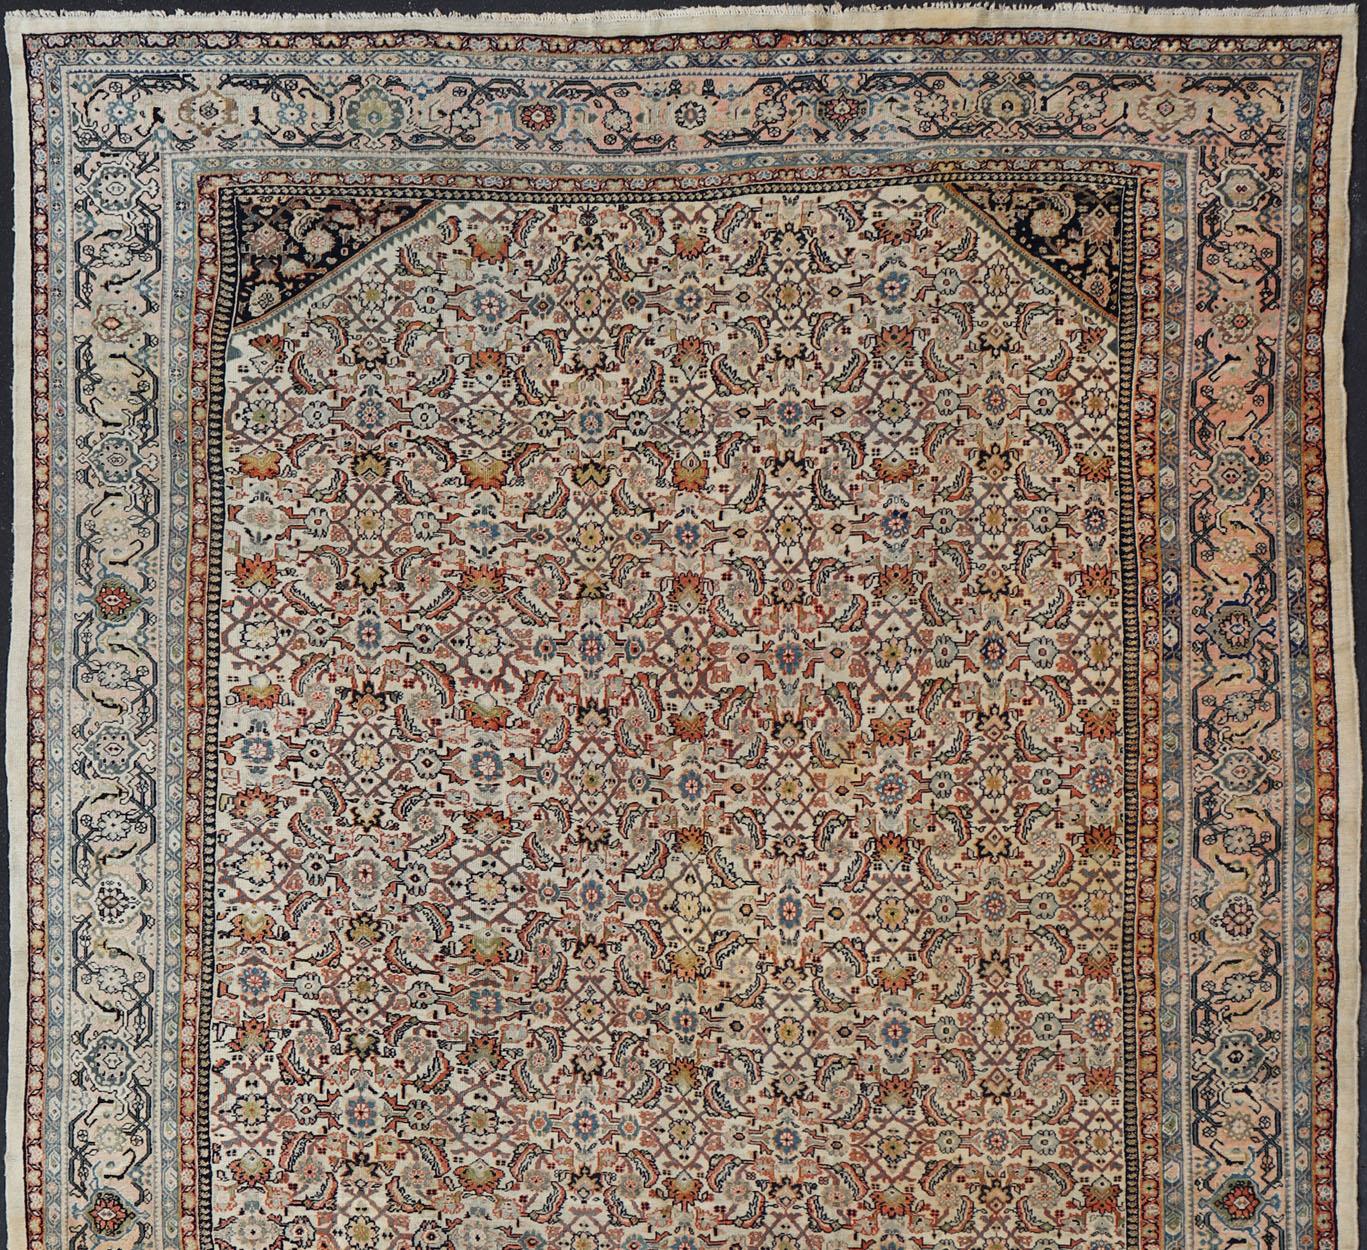 Outstanding Antique Sultanabad Persian rug ivory background from Persia with all-over geometric design, rug R20-1209, country of origin / type: Iran / Sultanabad, circa 1900

Measures: 13' x 19'8

This outstanding antique Persian Sultanabad rug